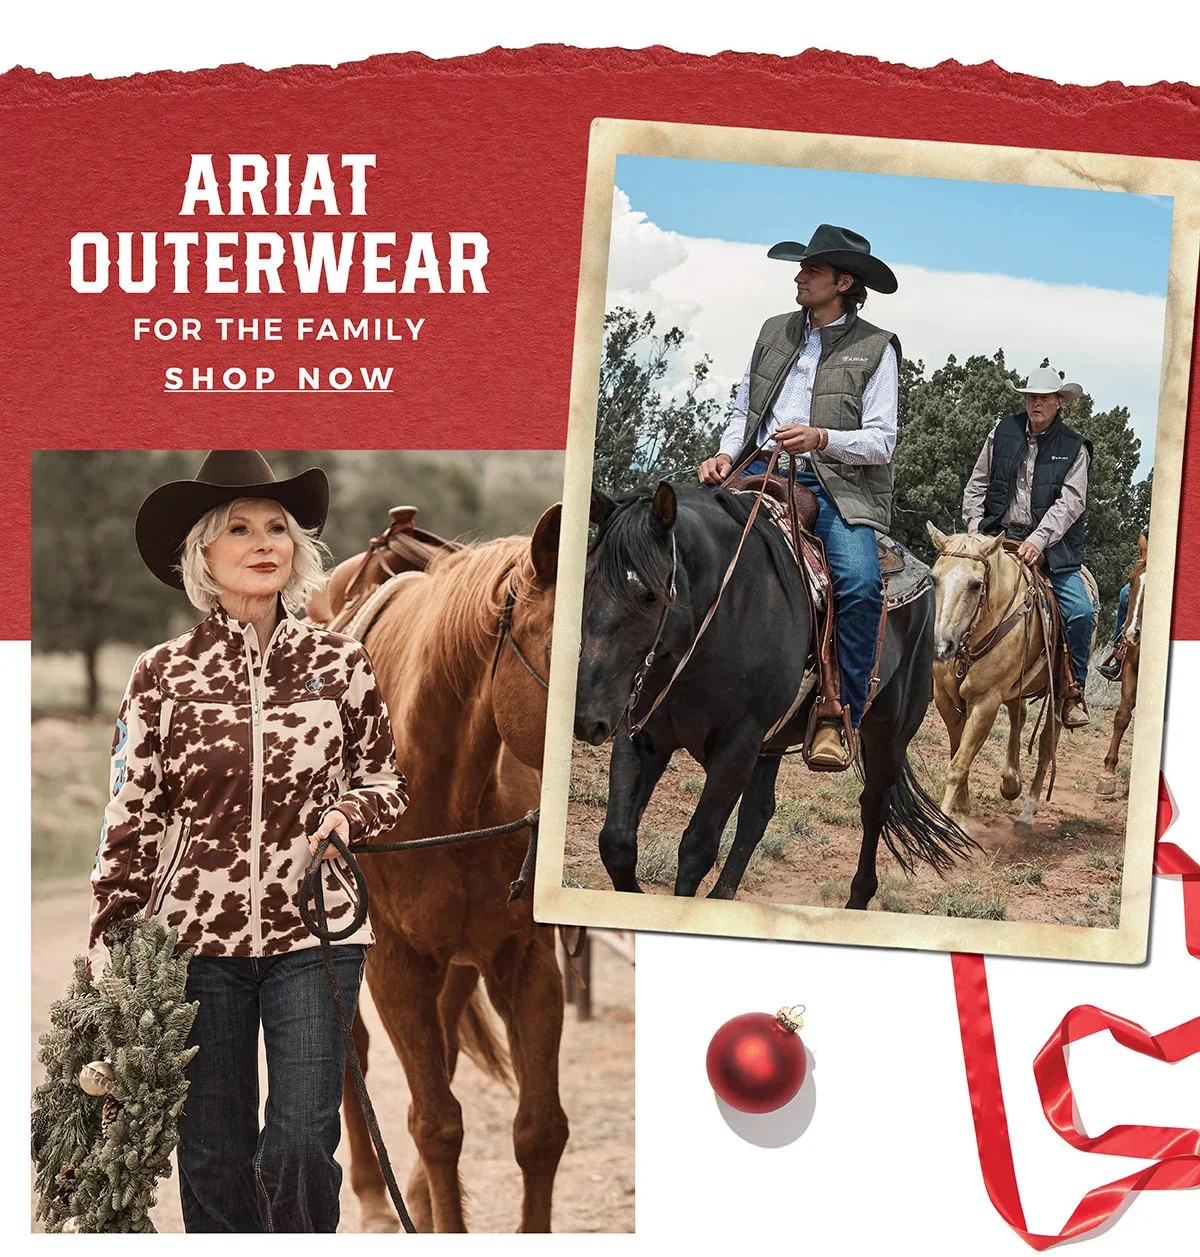 Ariat Outerwear For the Family | Shop Now